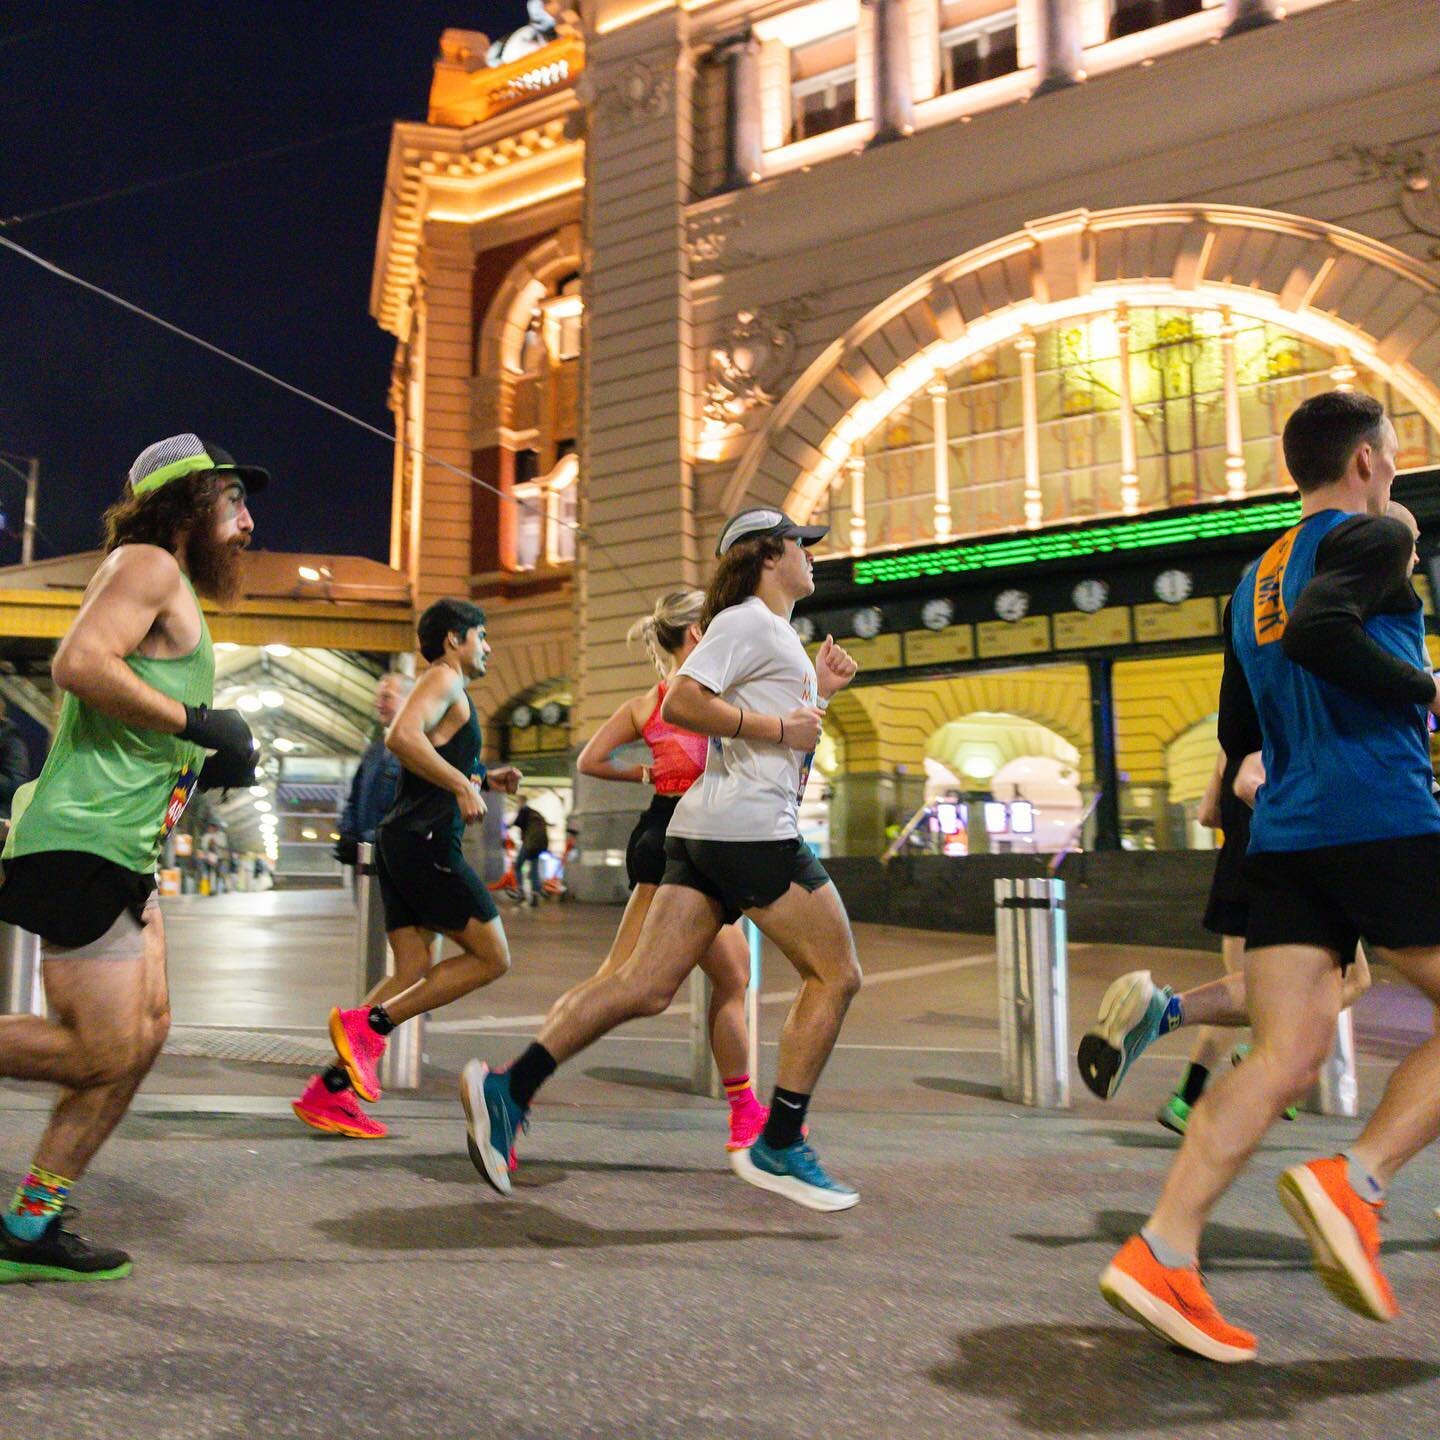 Some @runmelbourne highlights from last month&rsquo;s event. I love seeing how the city changes and grows each year and the challenge of coming up with different ways to show off both Melbourne and the event.